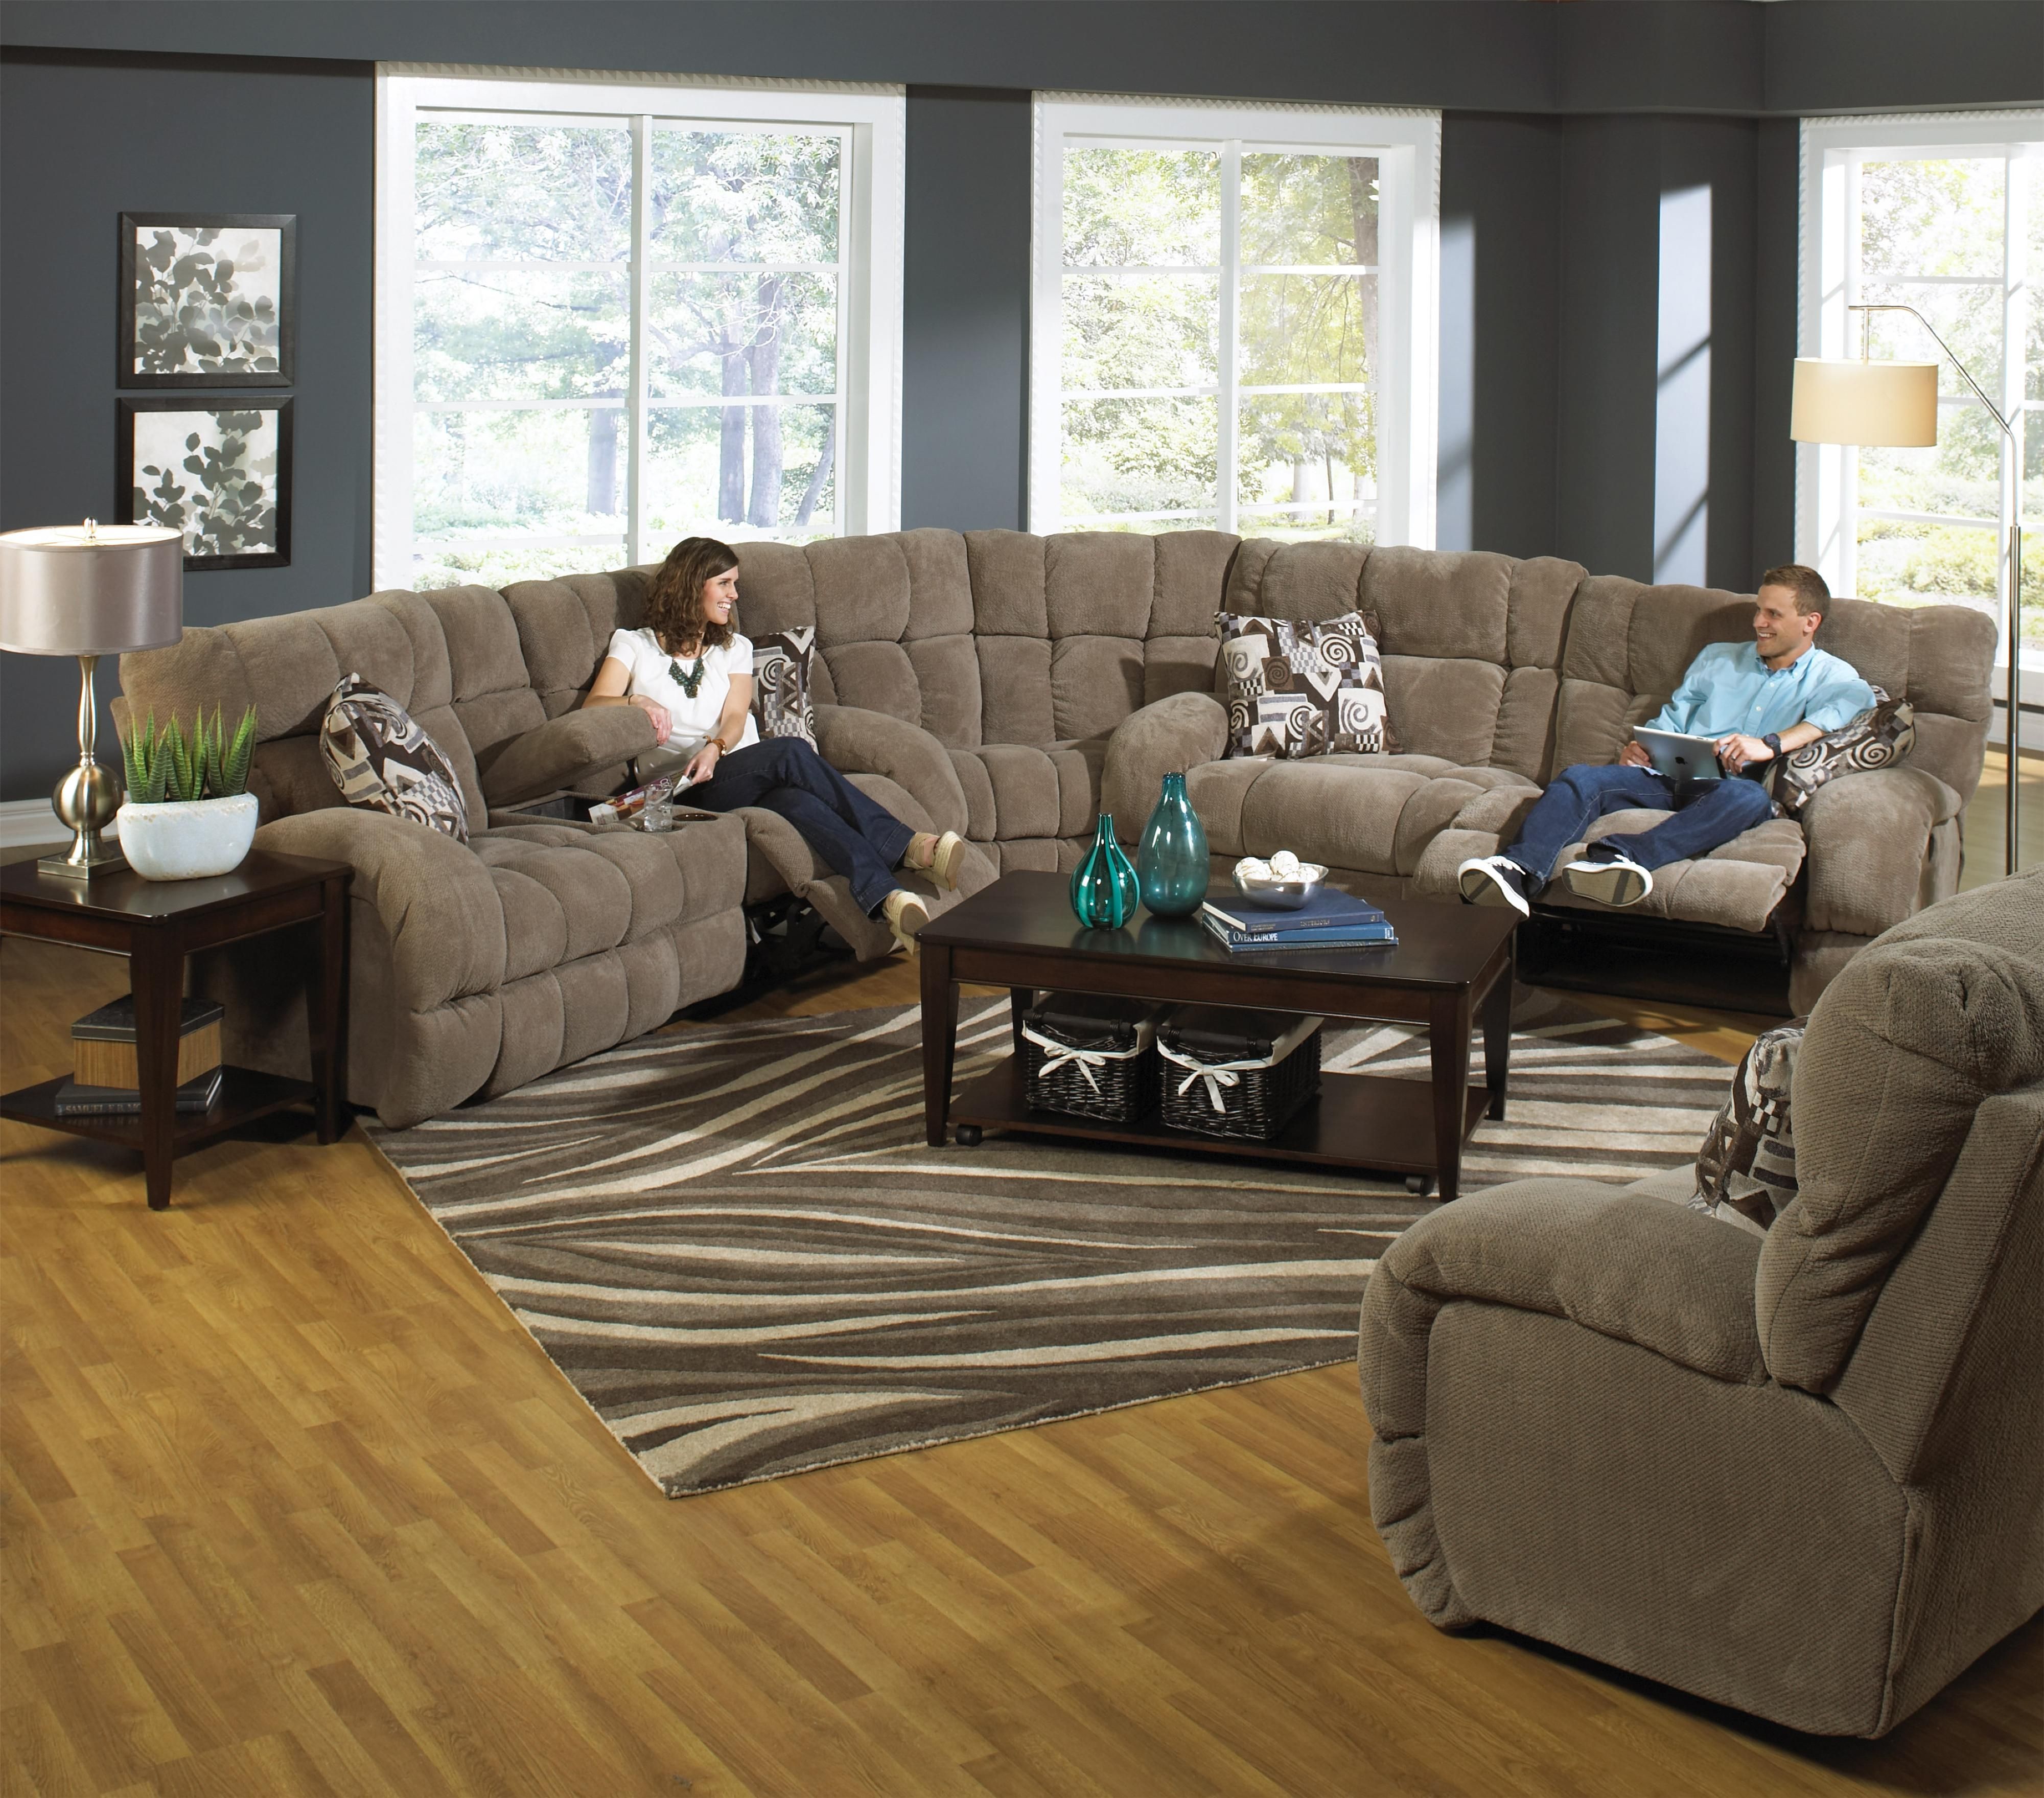 Power Lay Flat Recliner With Wide Seat Catnapper Wolf And Inside 7 Seat Sectional Sofa (View 4 of 12)